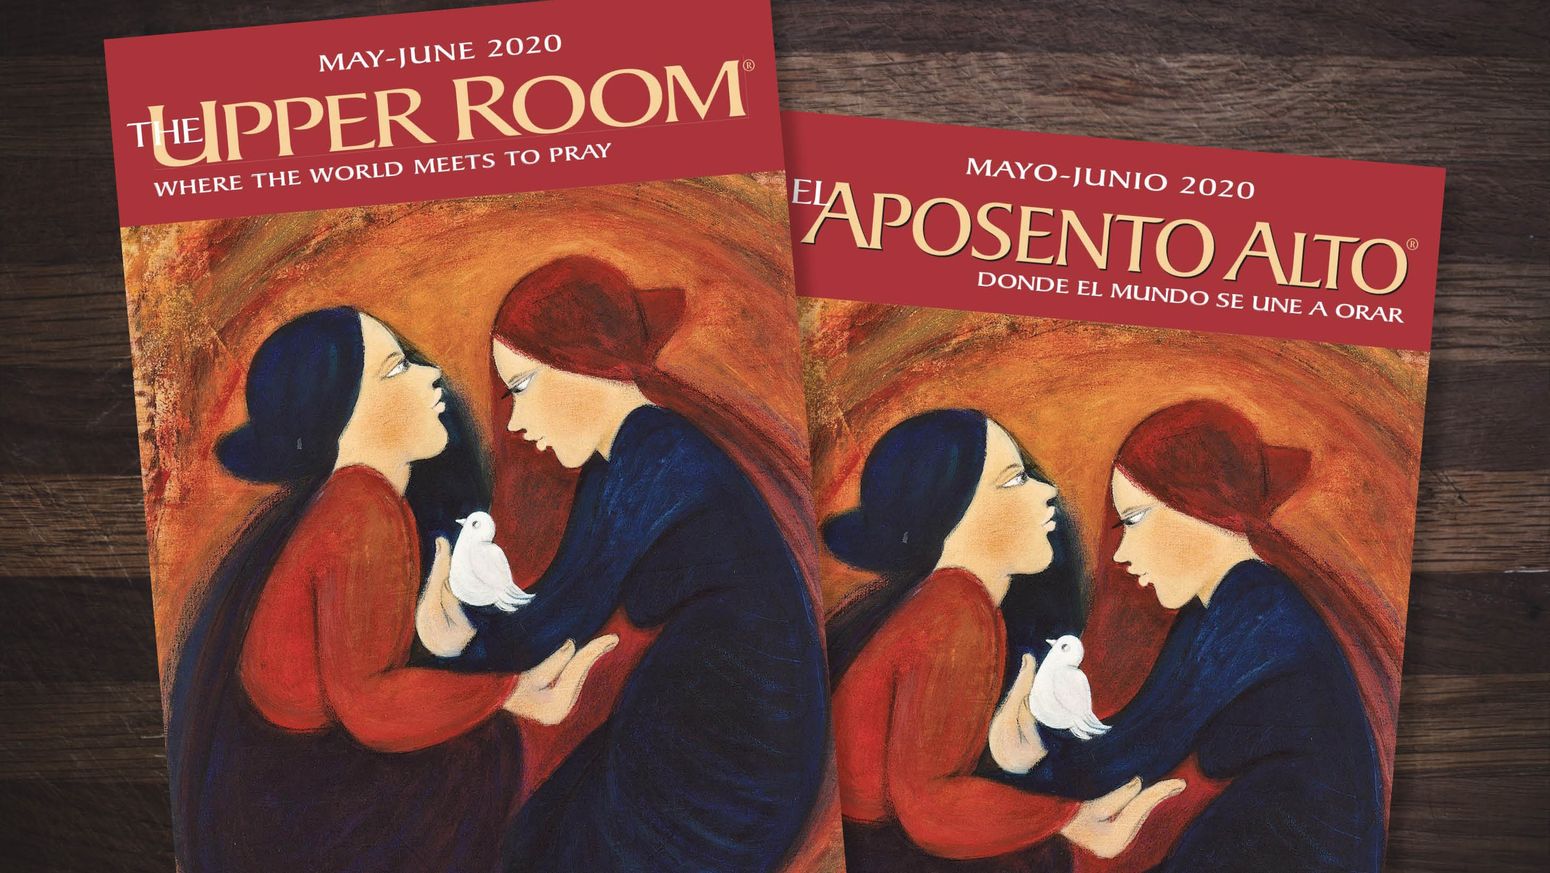 Special Editions of The Upper Room - The Upper Room